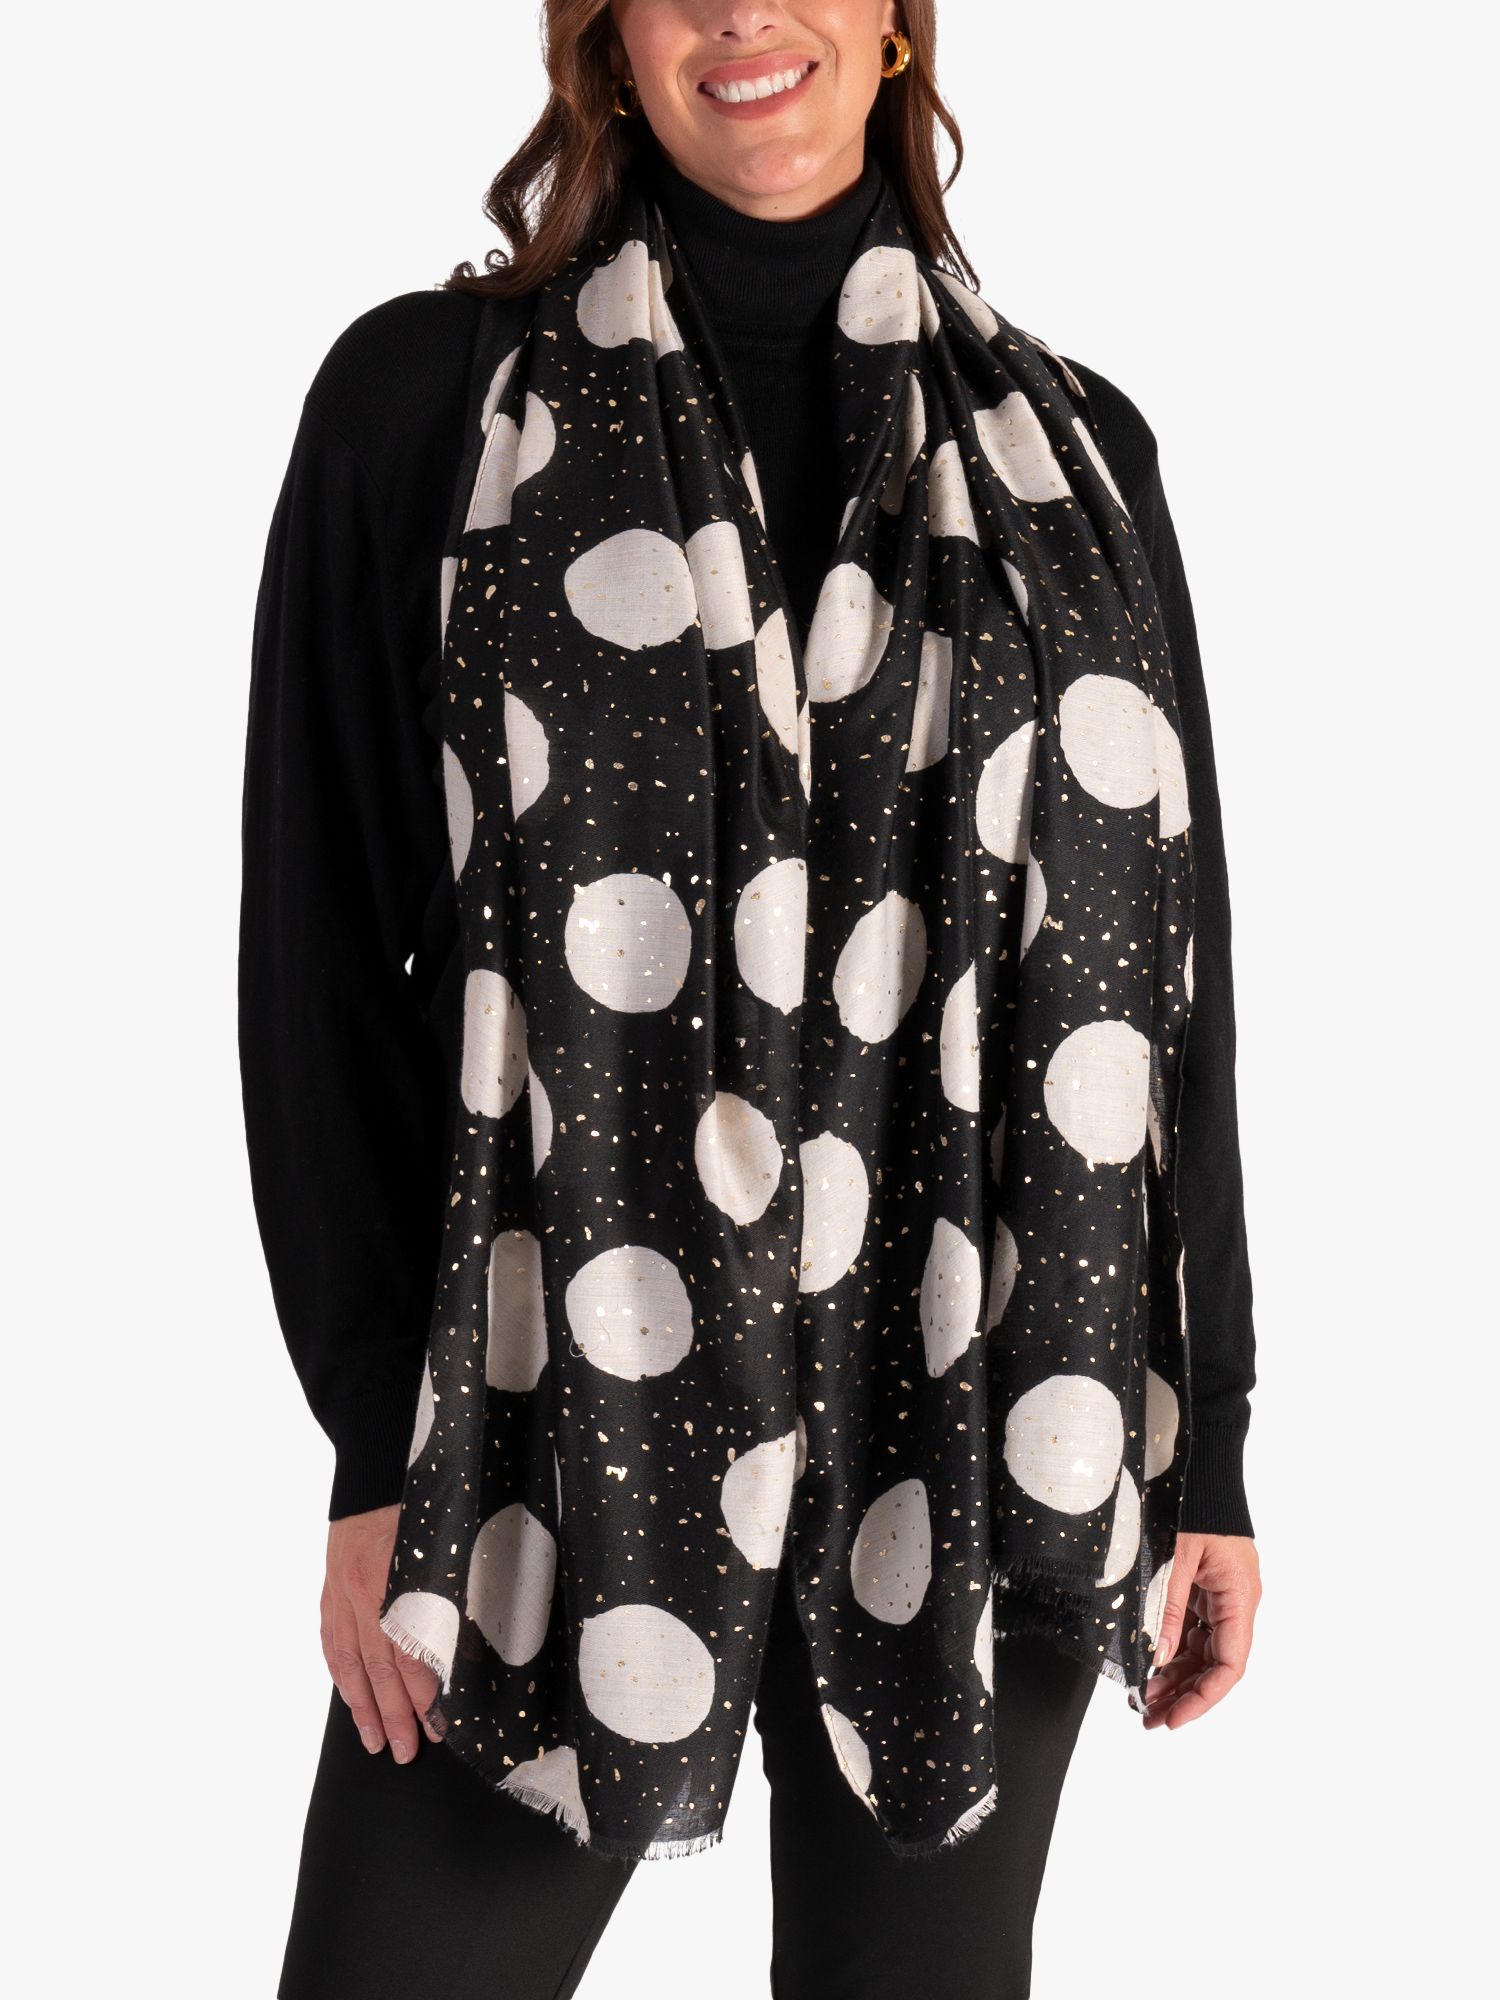 chesca Large Spot with Speckles Printed Scarf, Black/Gold at John